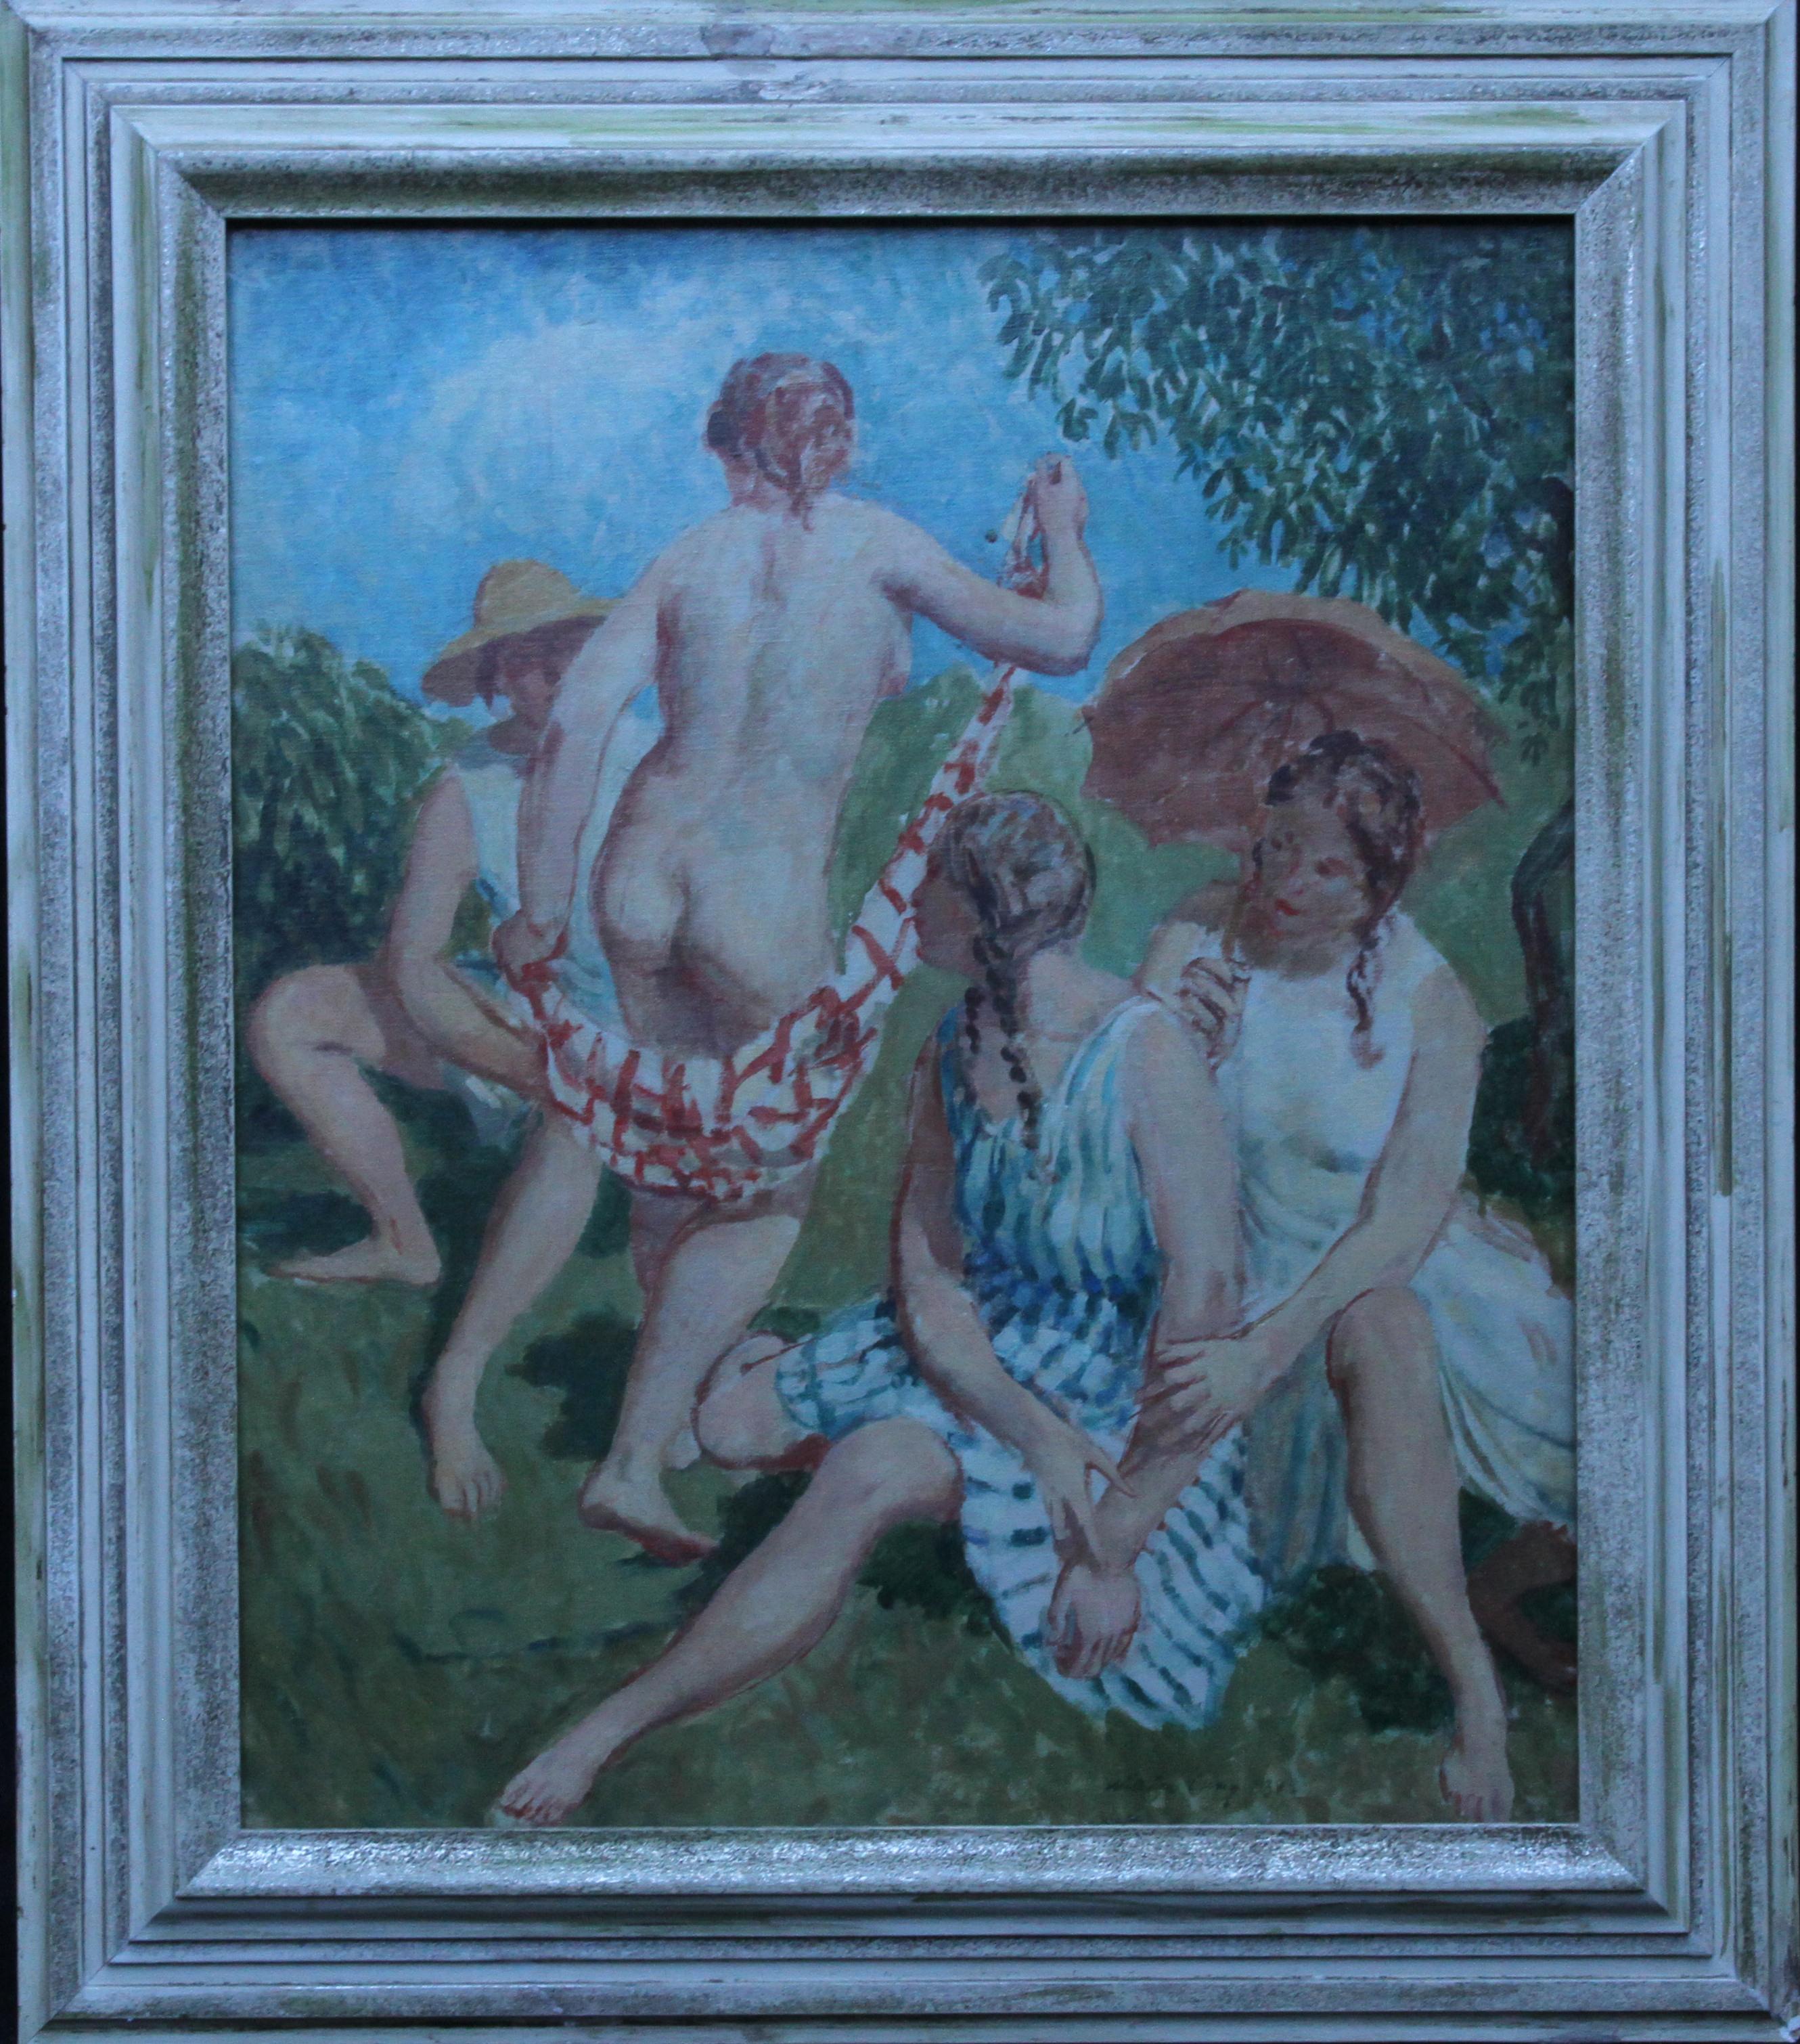 William Dring Figurative Painting - Summer Frolic - British Post Impressionist 30's art nude oil painting Slade Sch